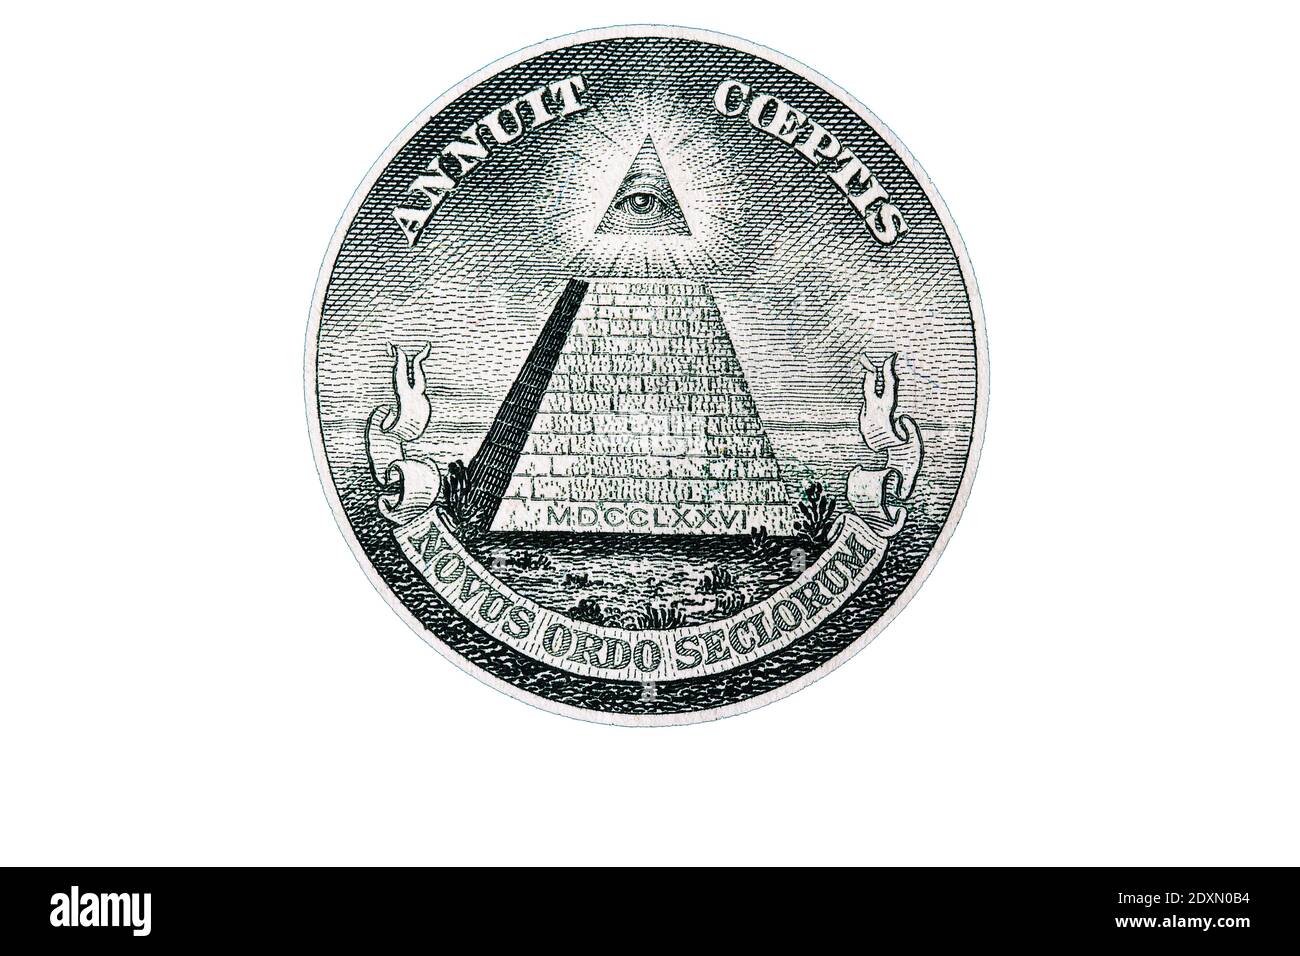 Pyramid from back side of 1 dollar bill on white background Stock Photo